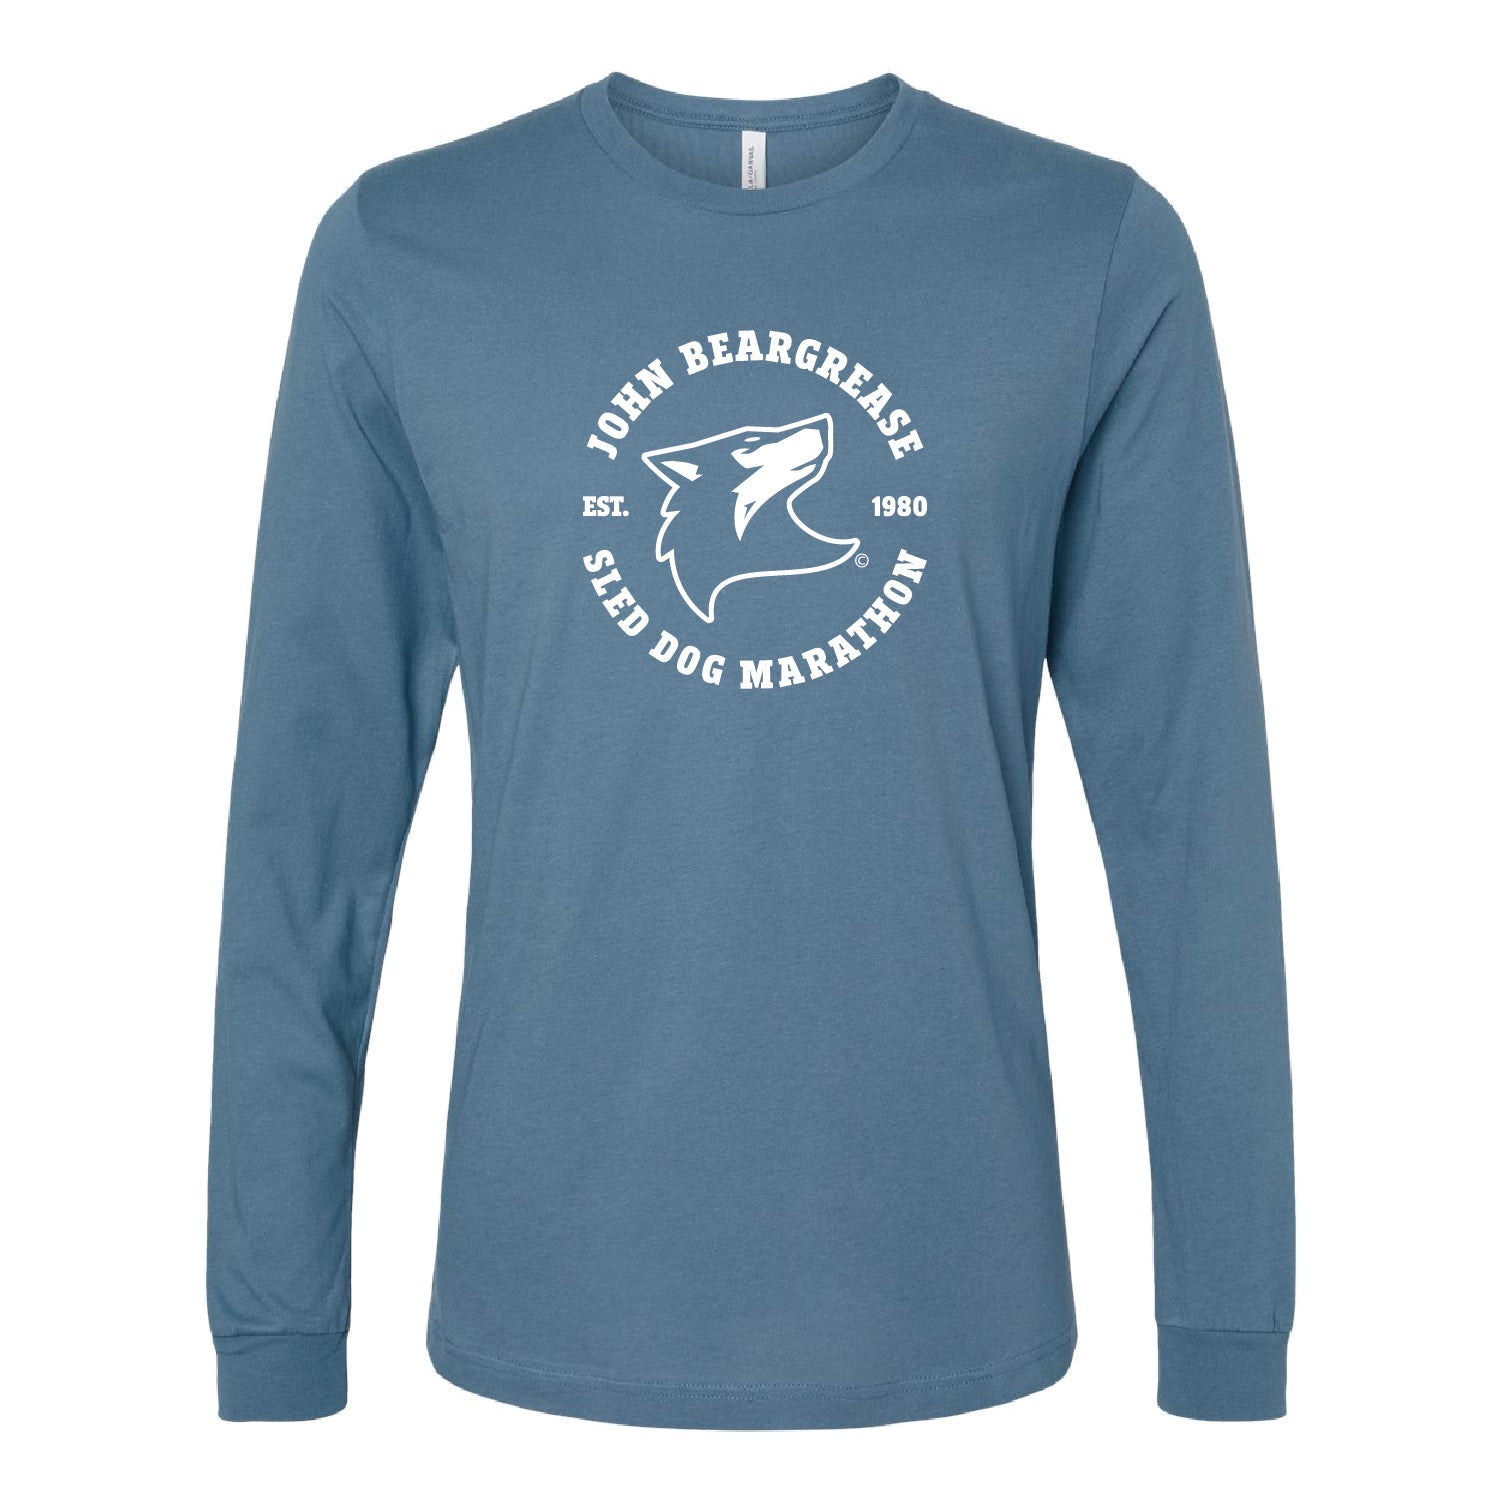 Beargrease Unisex Jersey Long Sleeve Tee - DSP On Demand